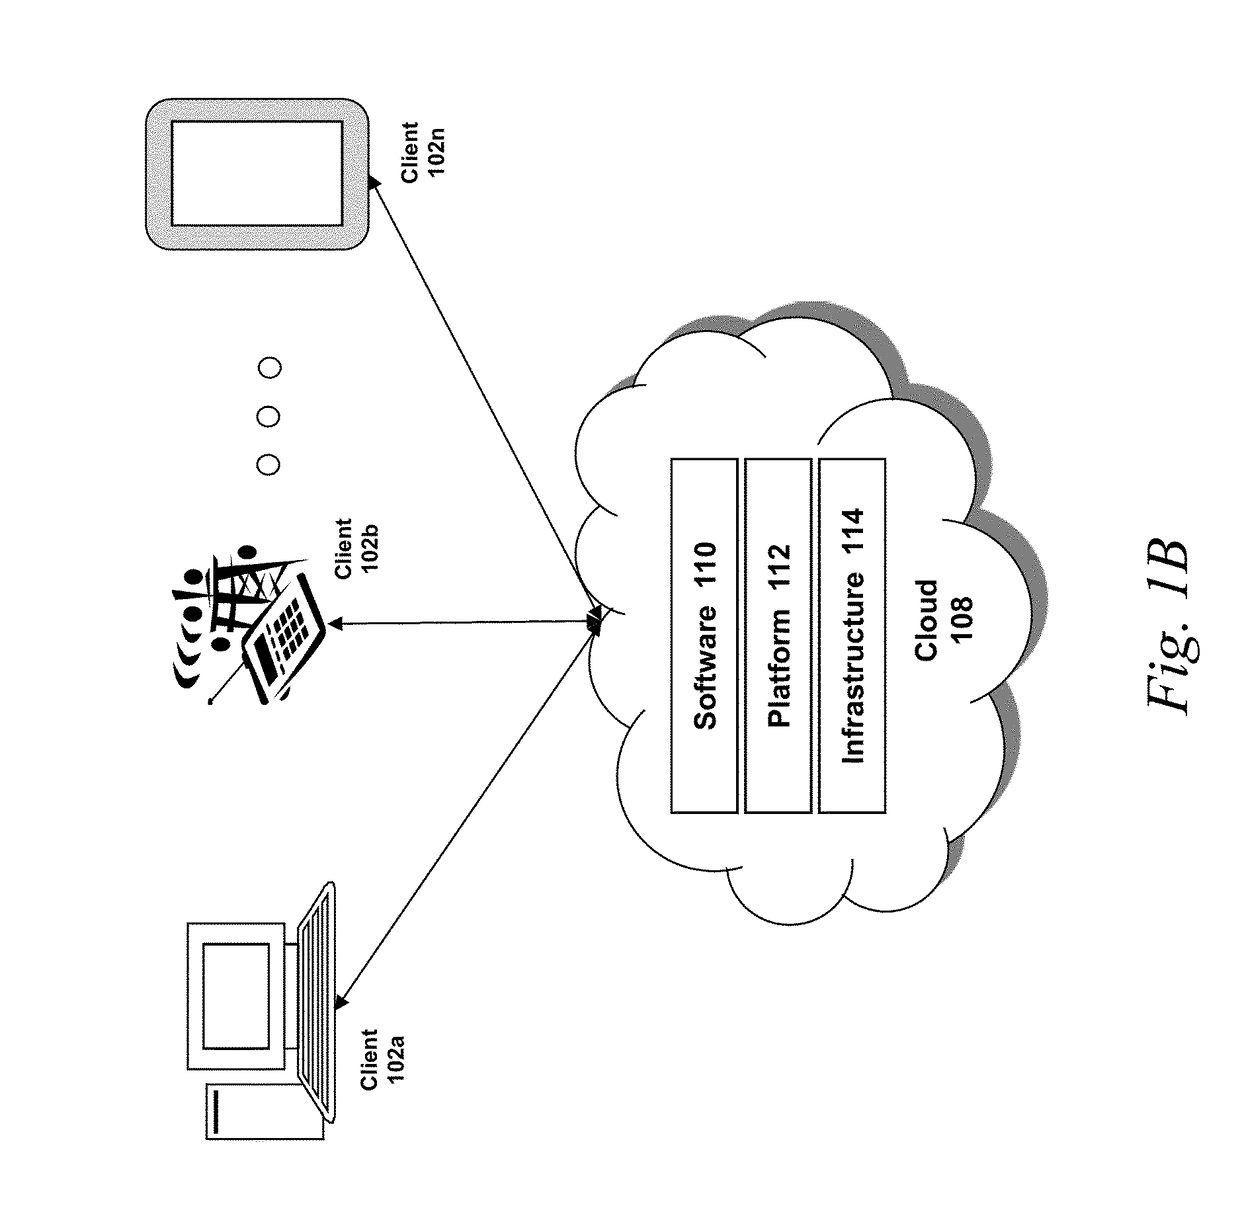 Systems and methods for creating and running heterogeneous phishing attack campaigns